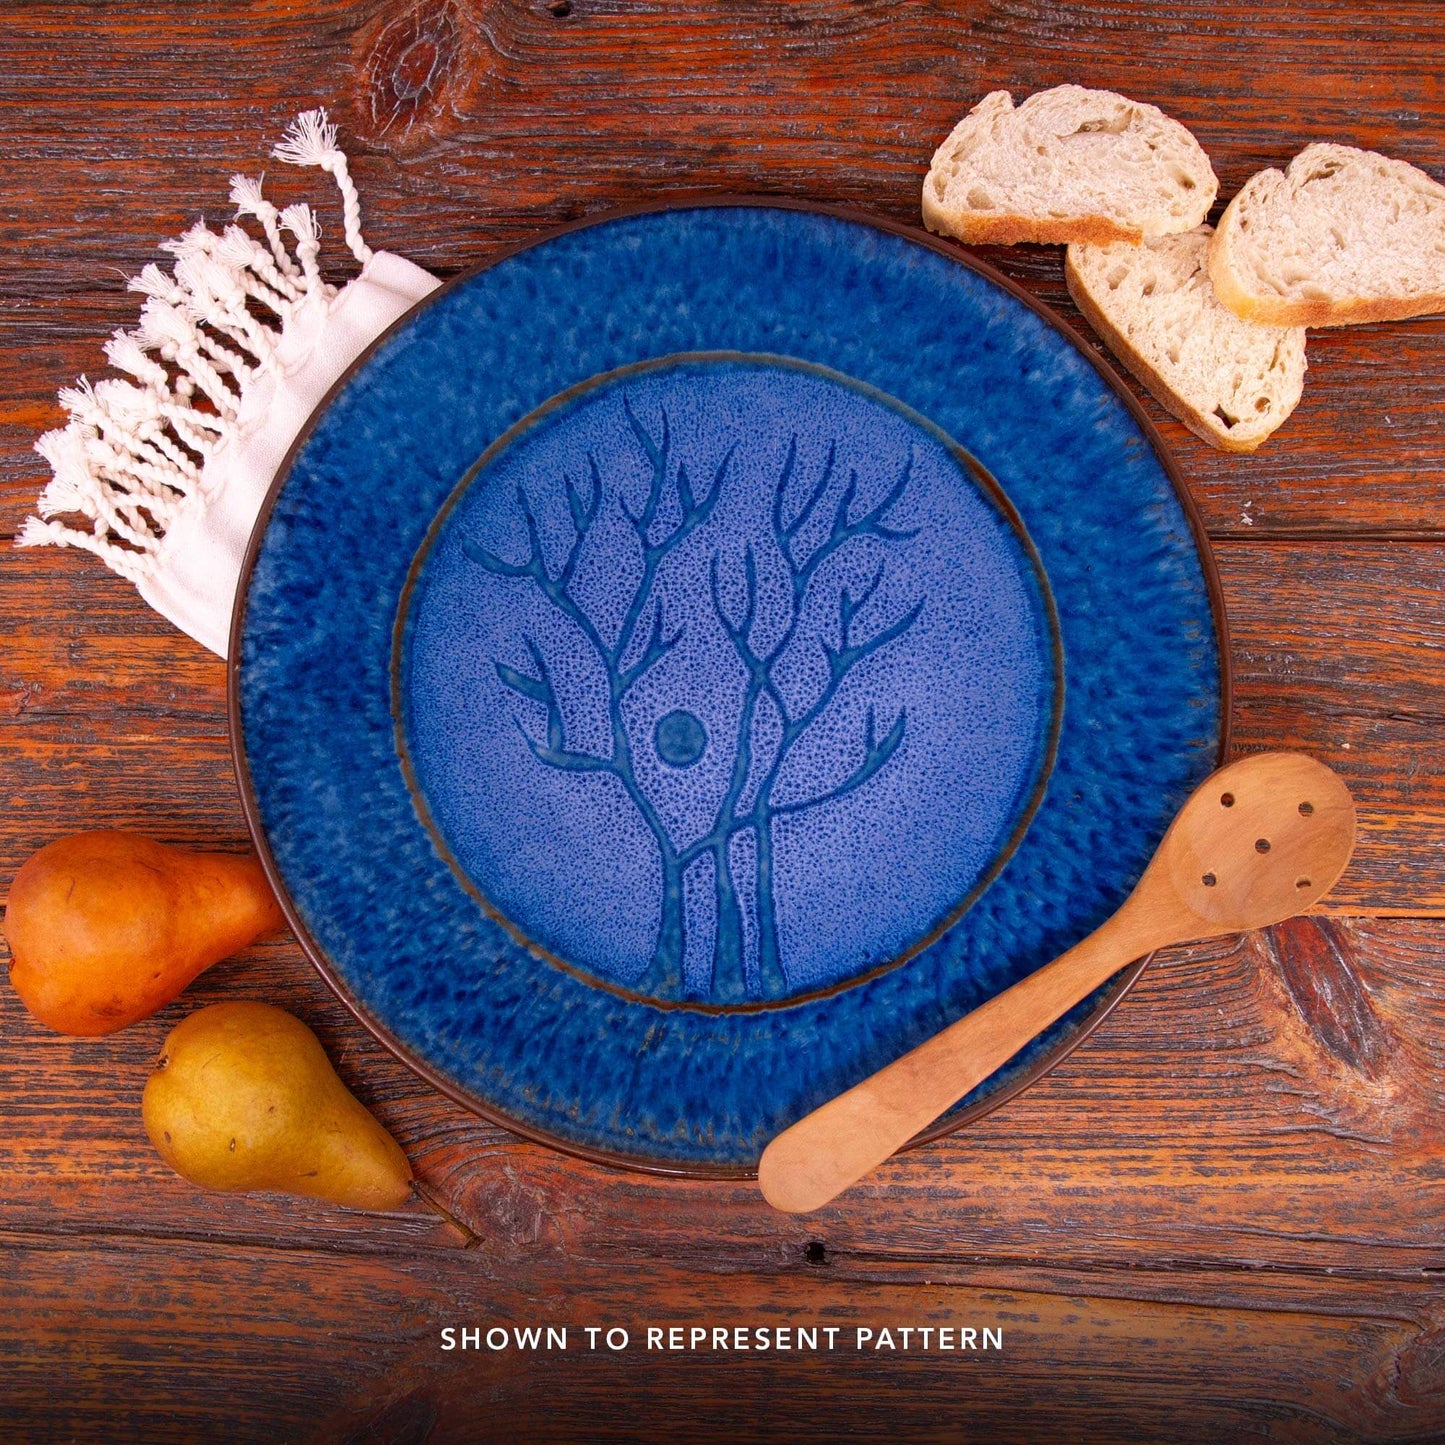 Handmade Pottery Large Chip & Dip in Blue Tree pattern made by Georgetown Pottery in Maine